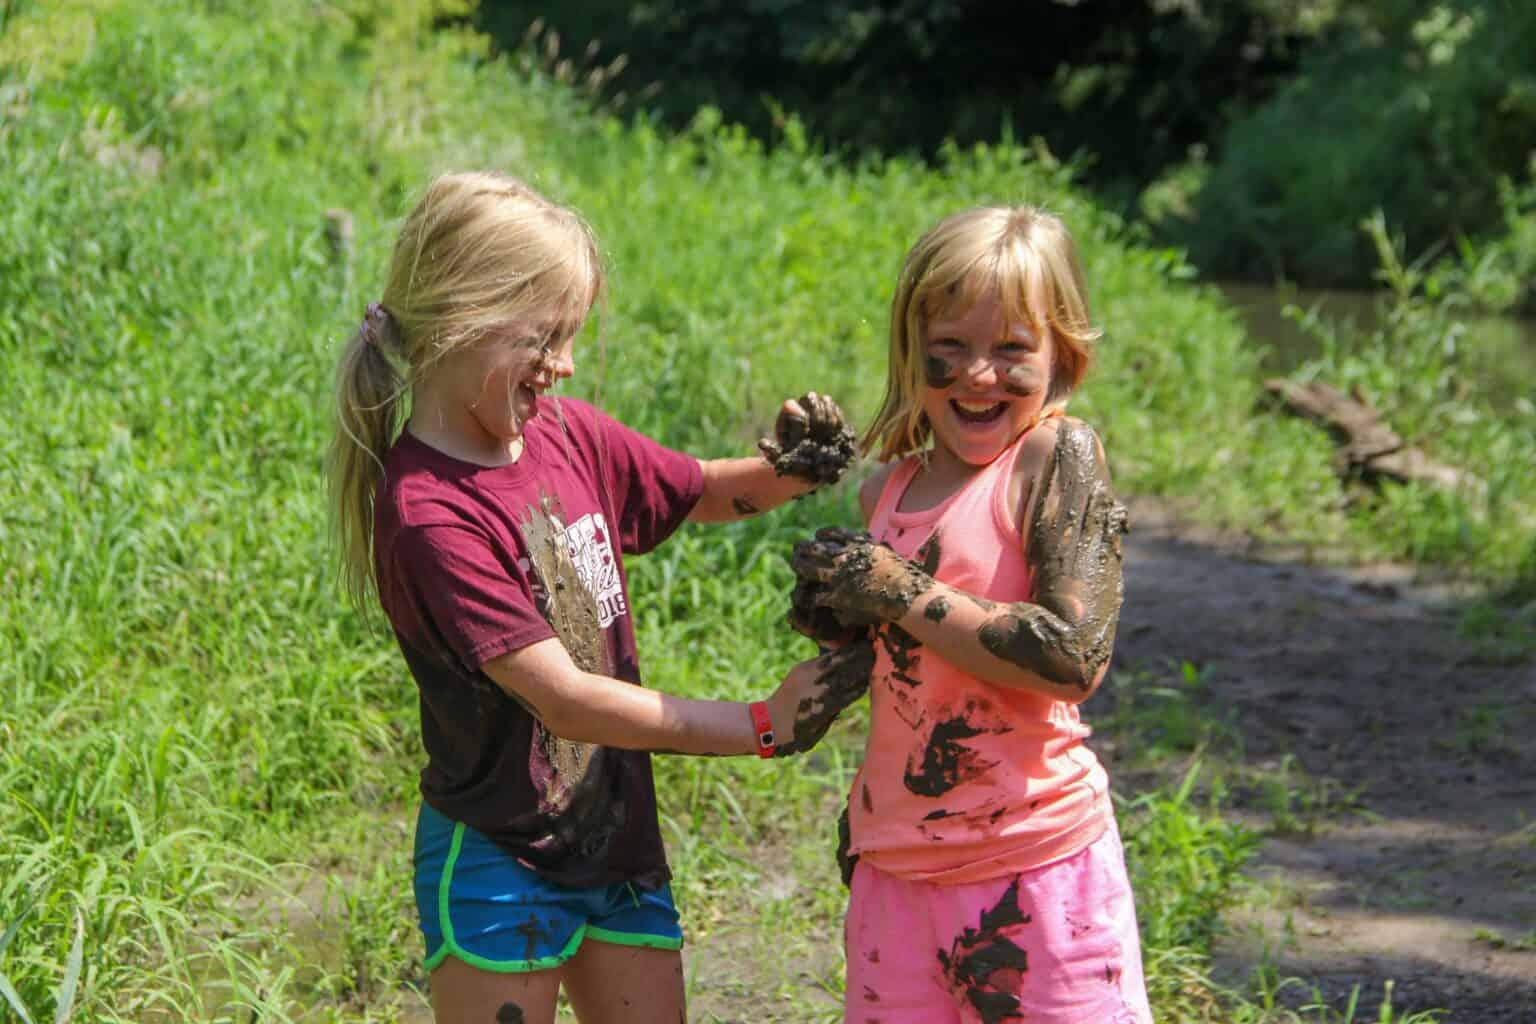 Two kids at a summer camp in Iowa playing in the mud.